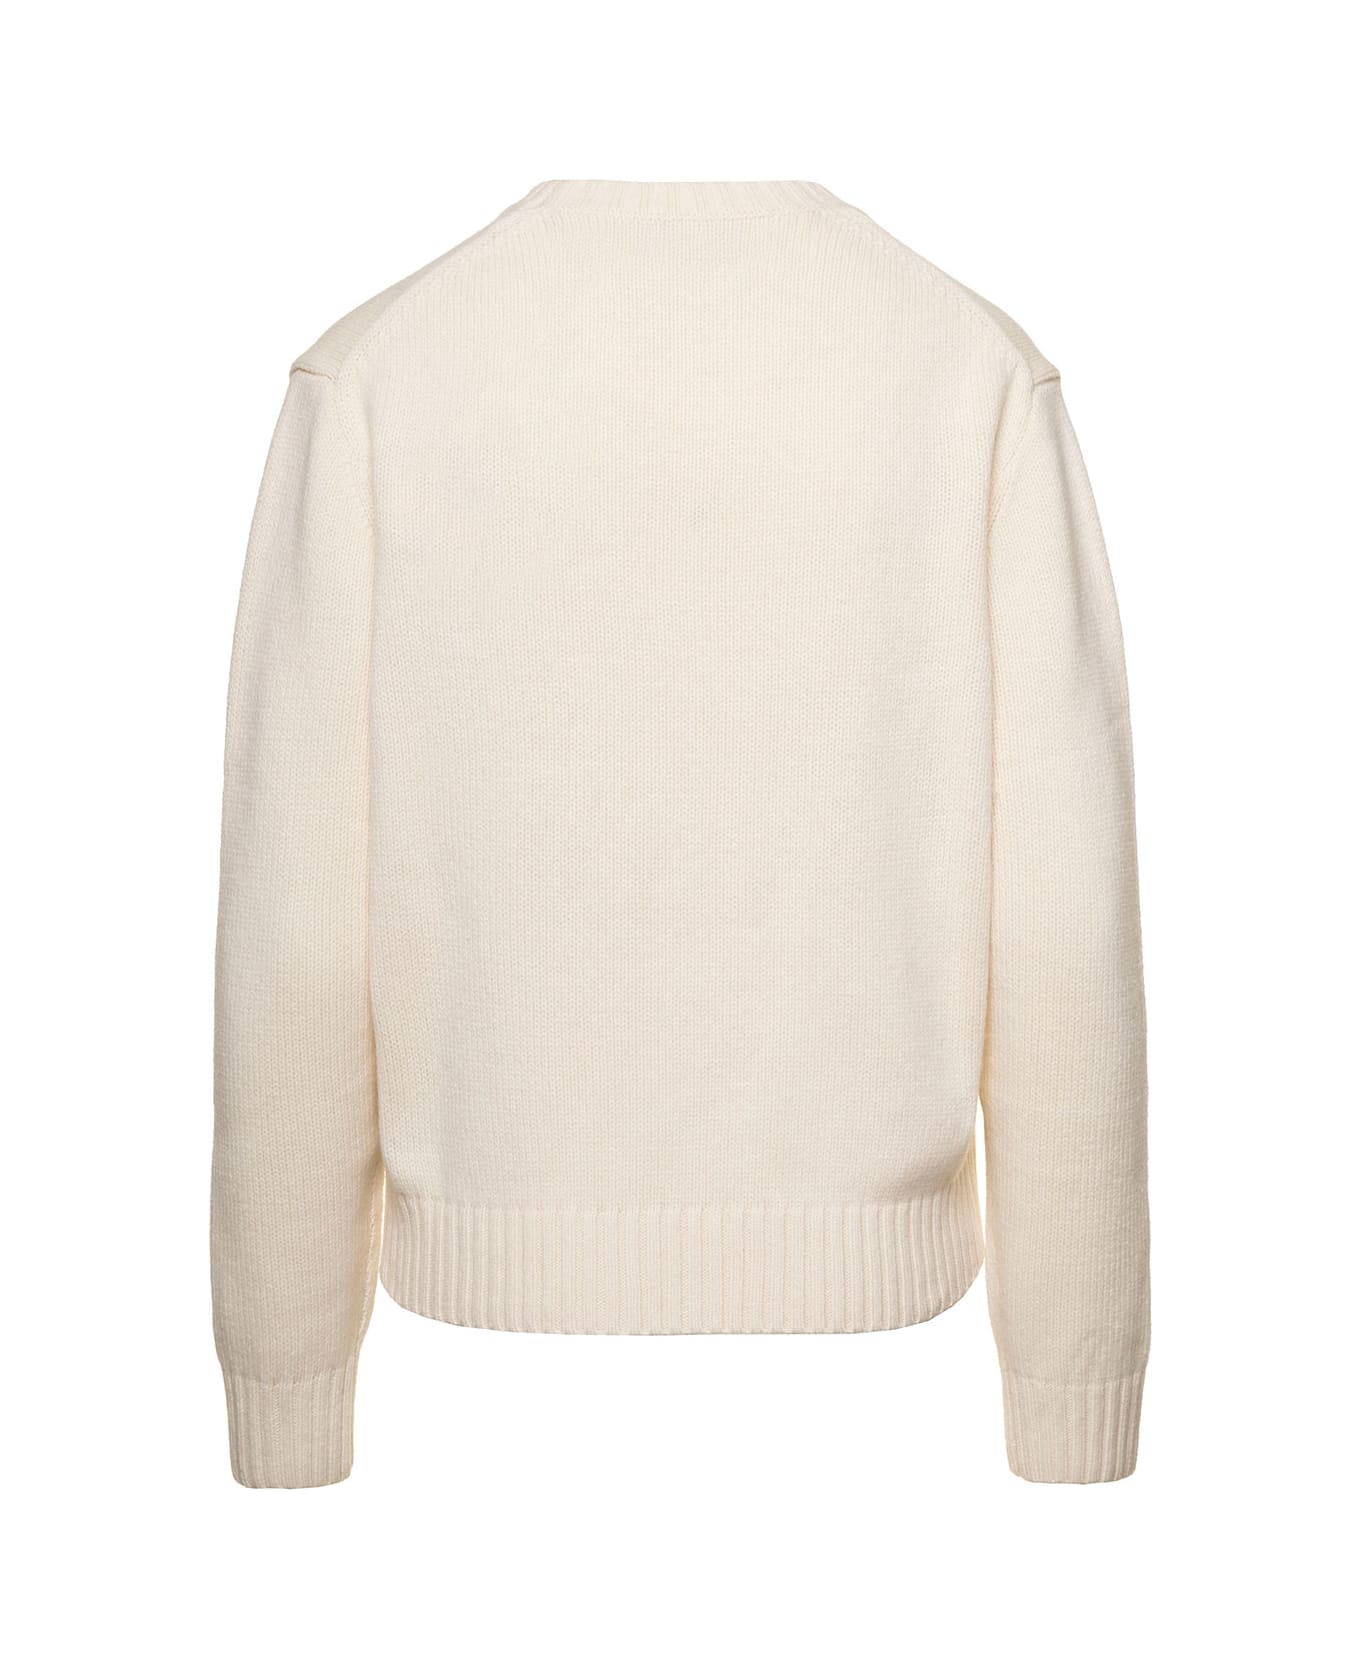 Polo Ralph Lauren White Crewneck Sweater With Jacquard Logo In Wool Woman - White ニットウェア